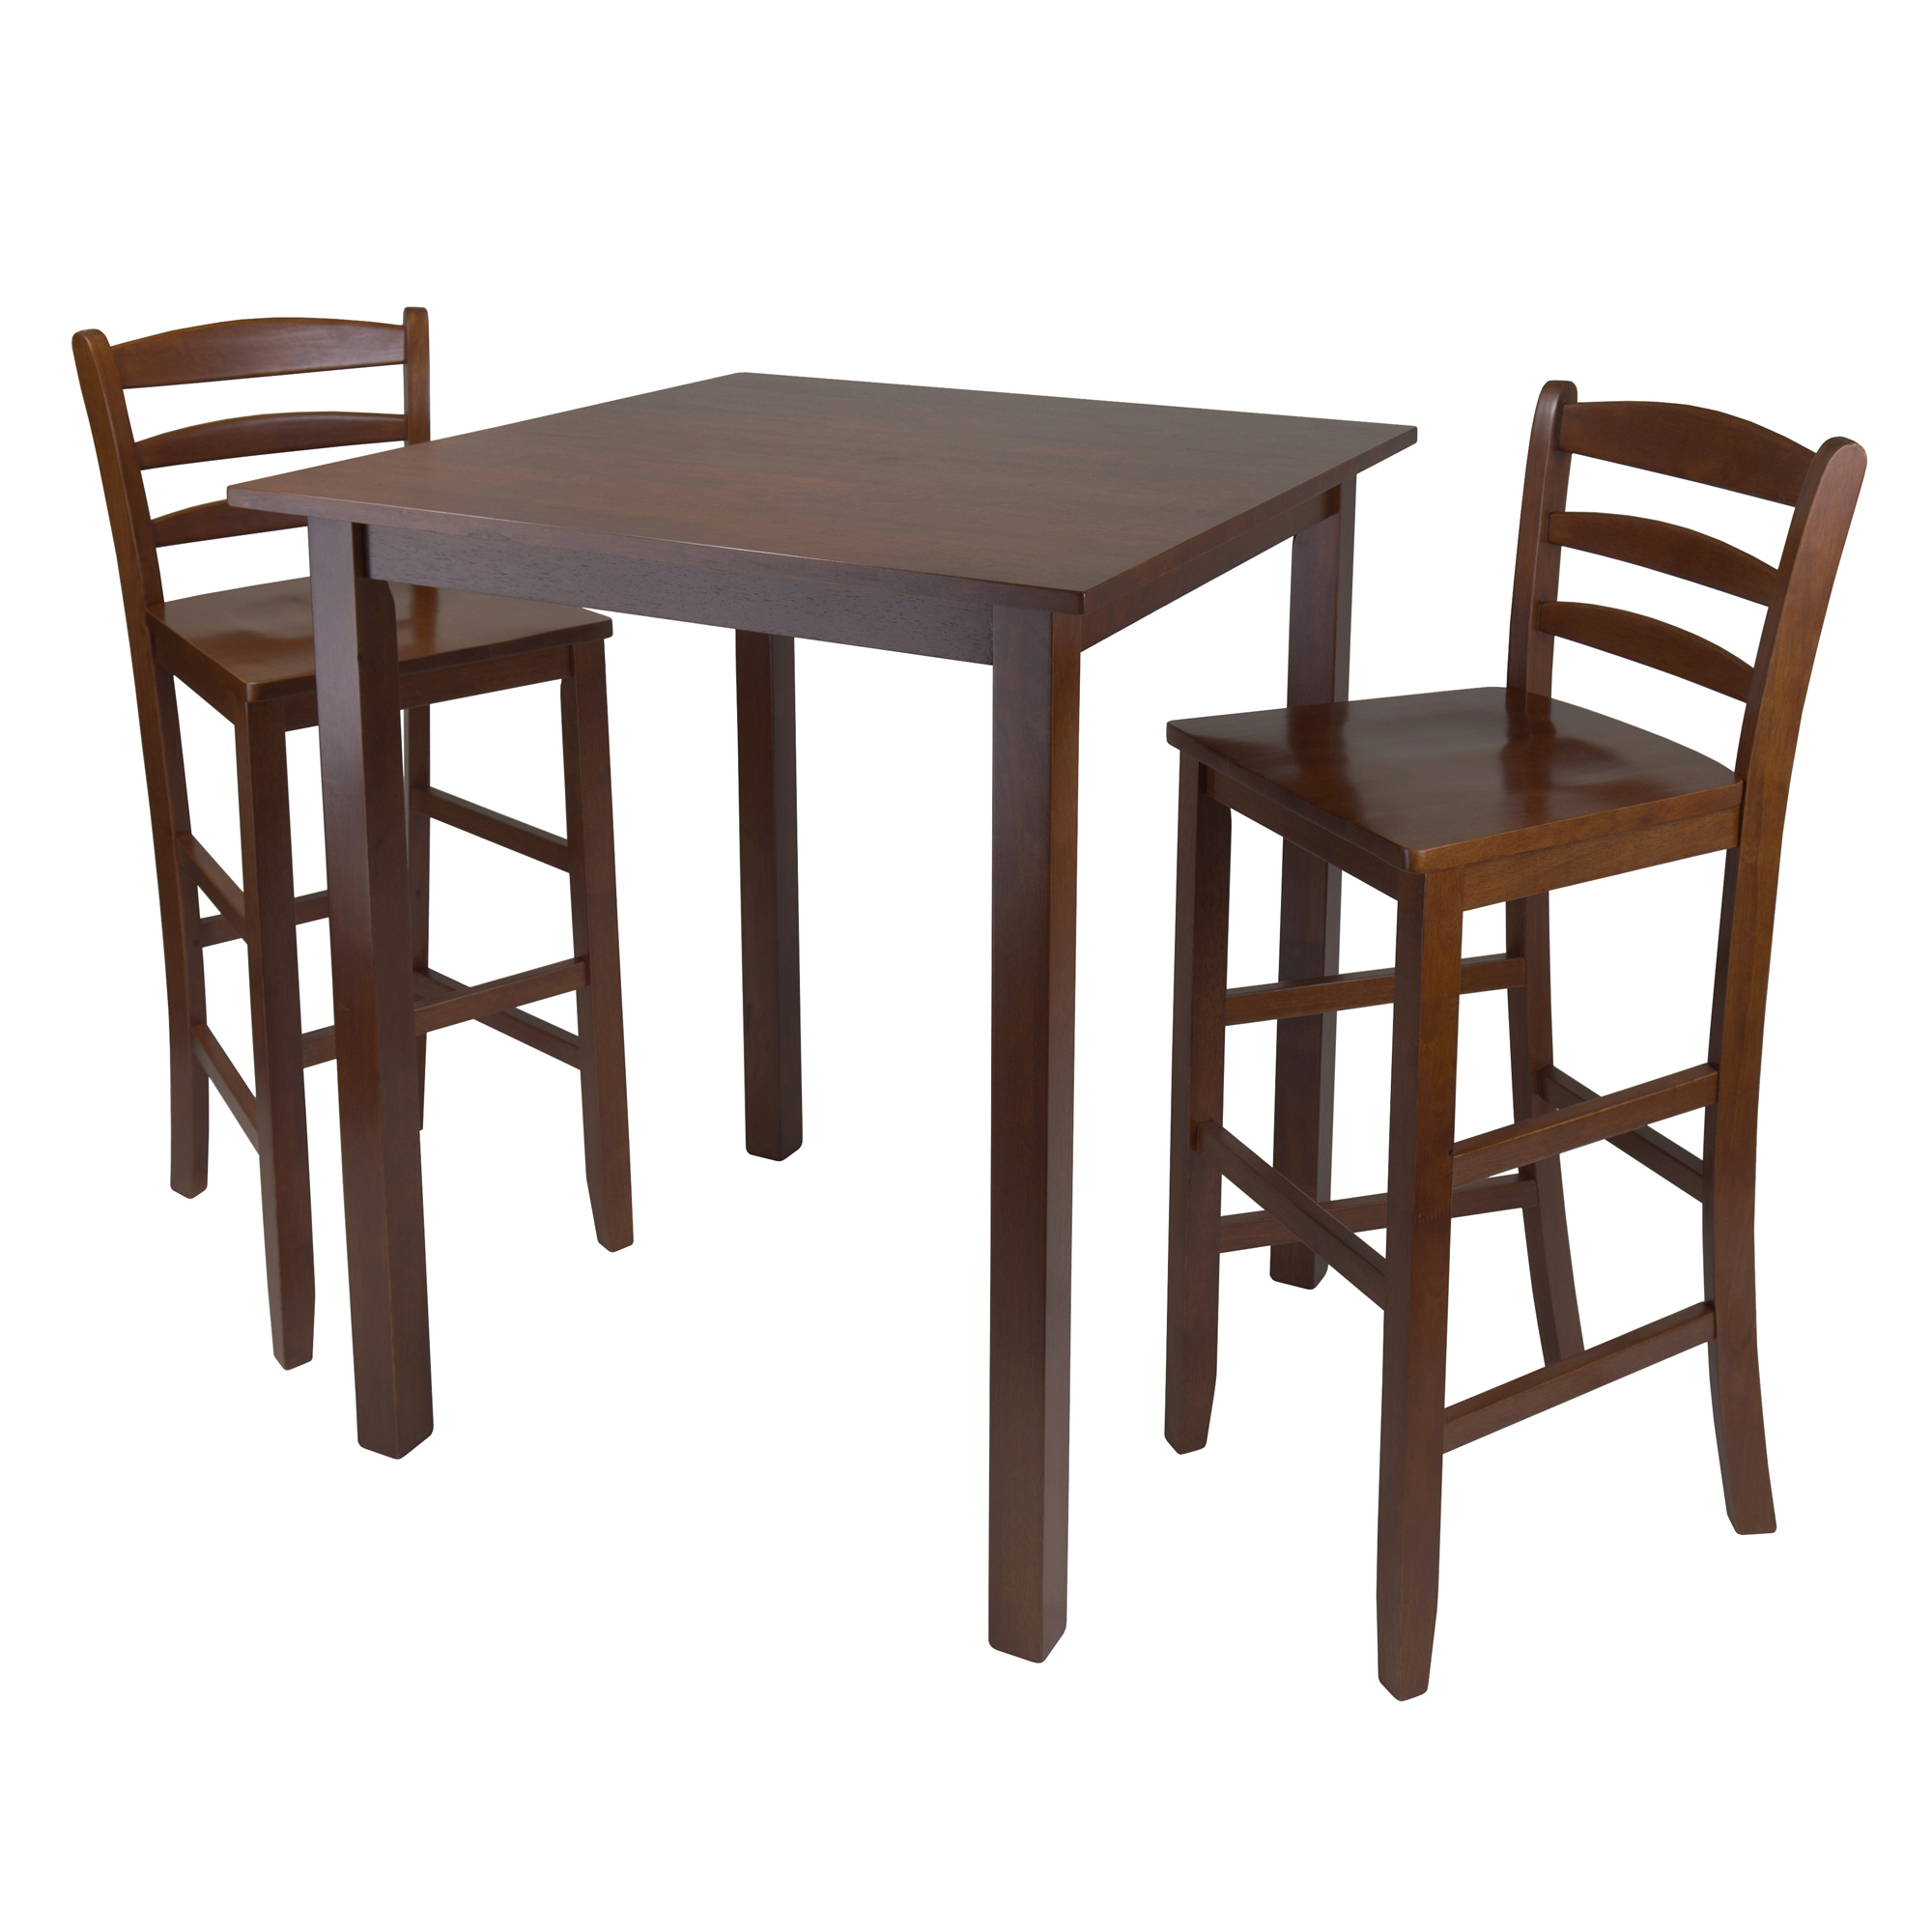 Winsome Wood Parkland Square High Table, Walnut Finish - image 4 of 5